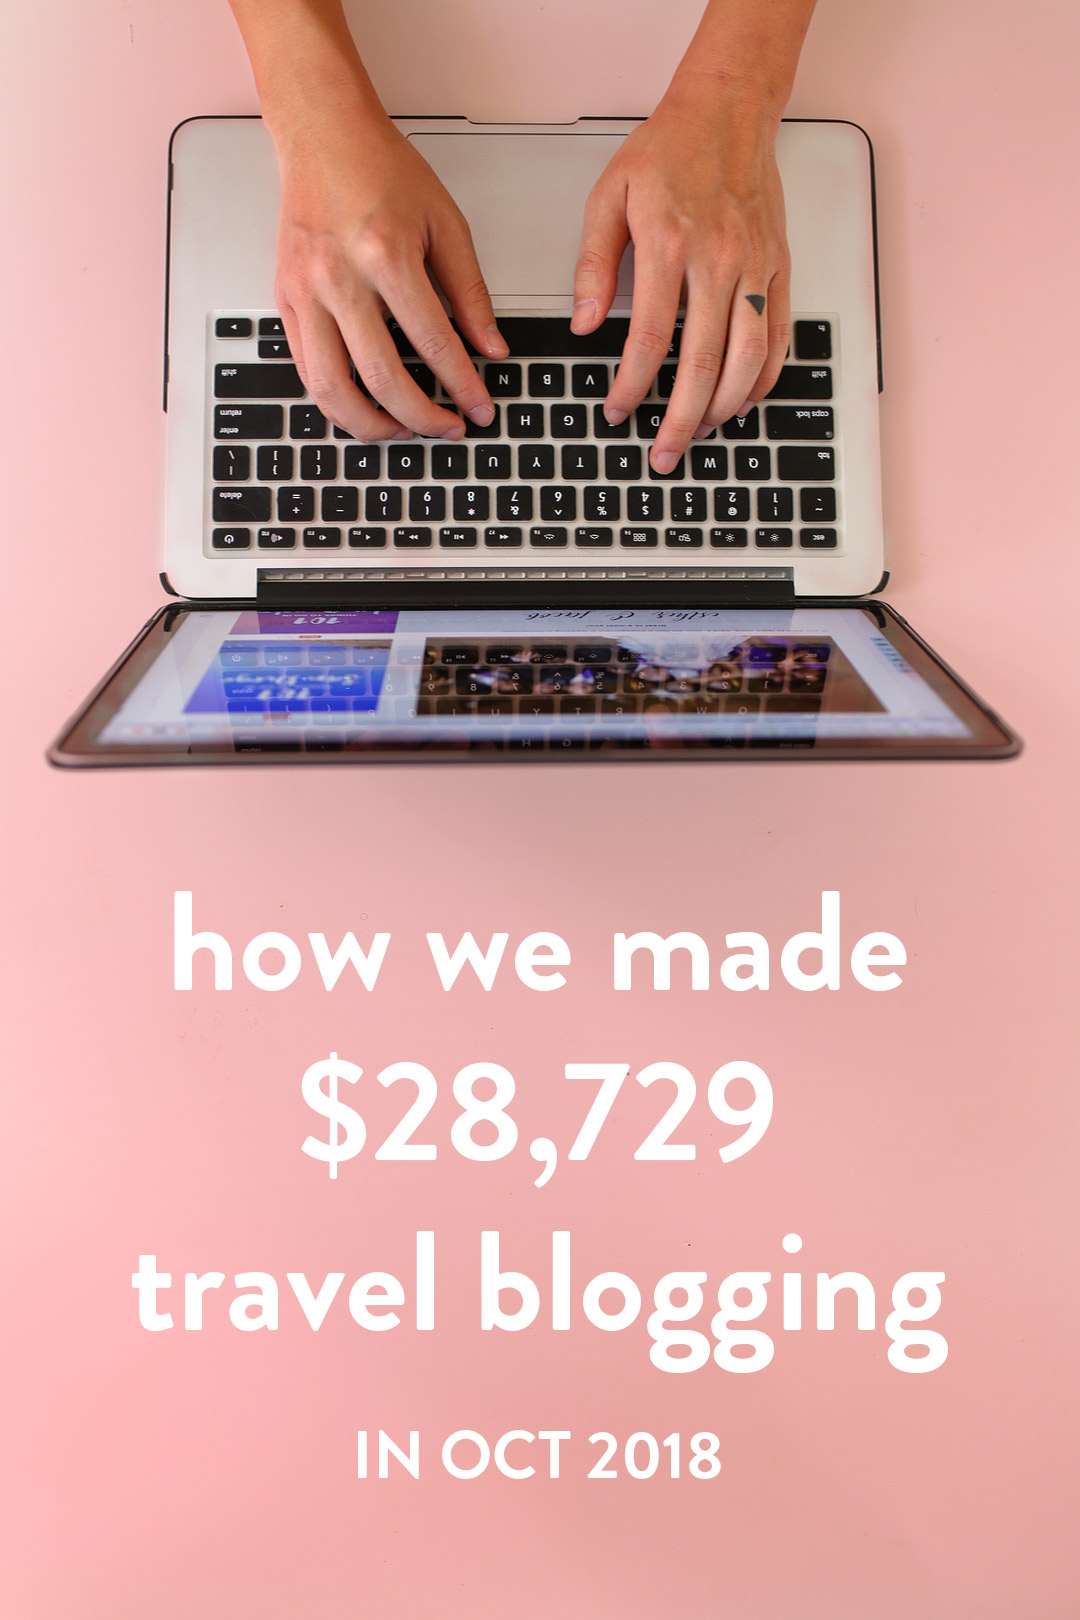 How We Made $28,729 in Oct from Travel Blogging - Travel Blogger Income Report // Local Adventurer #travelblog #travelblogger #blogger